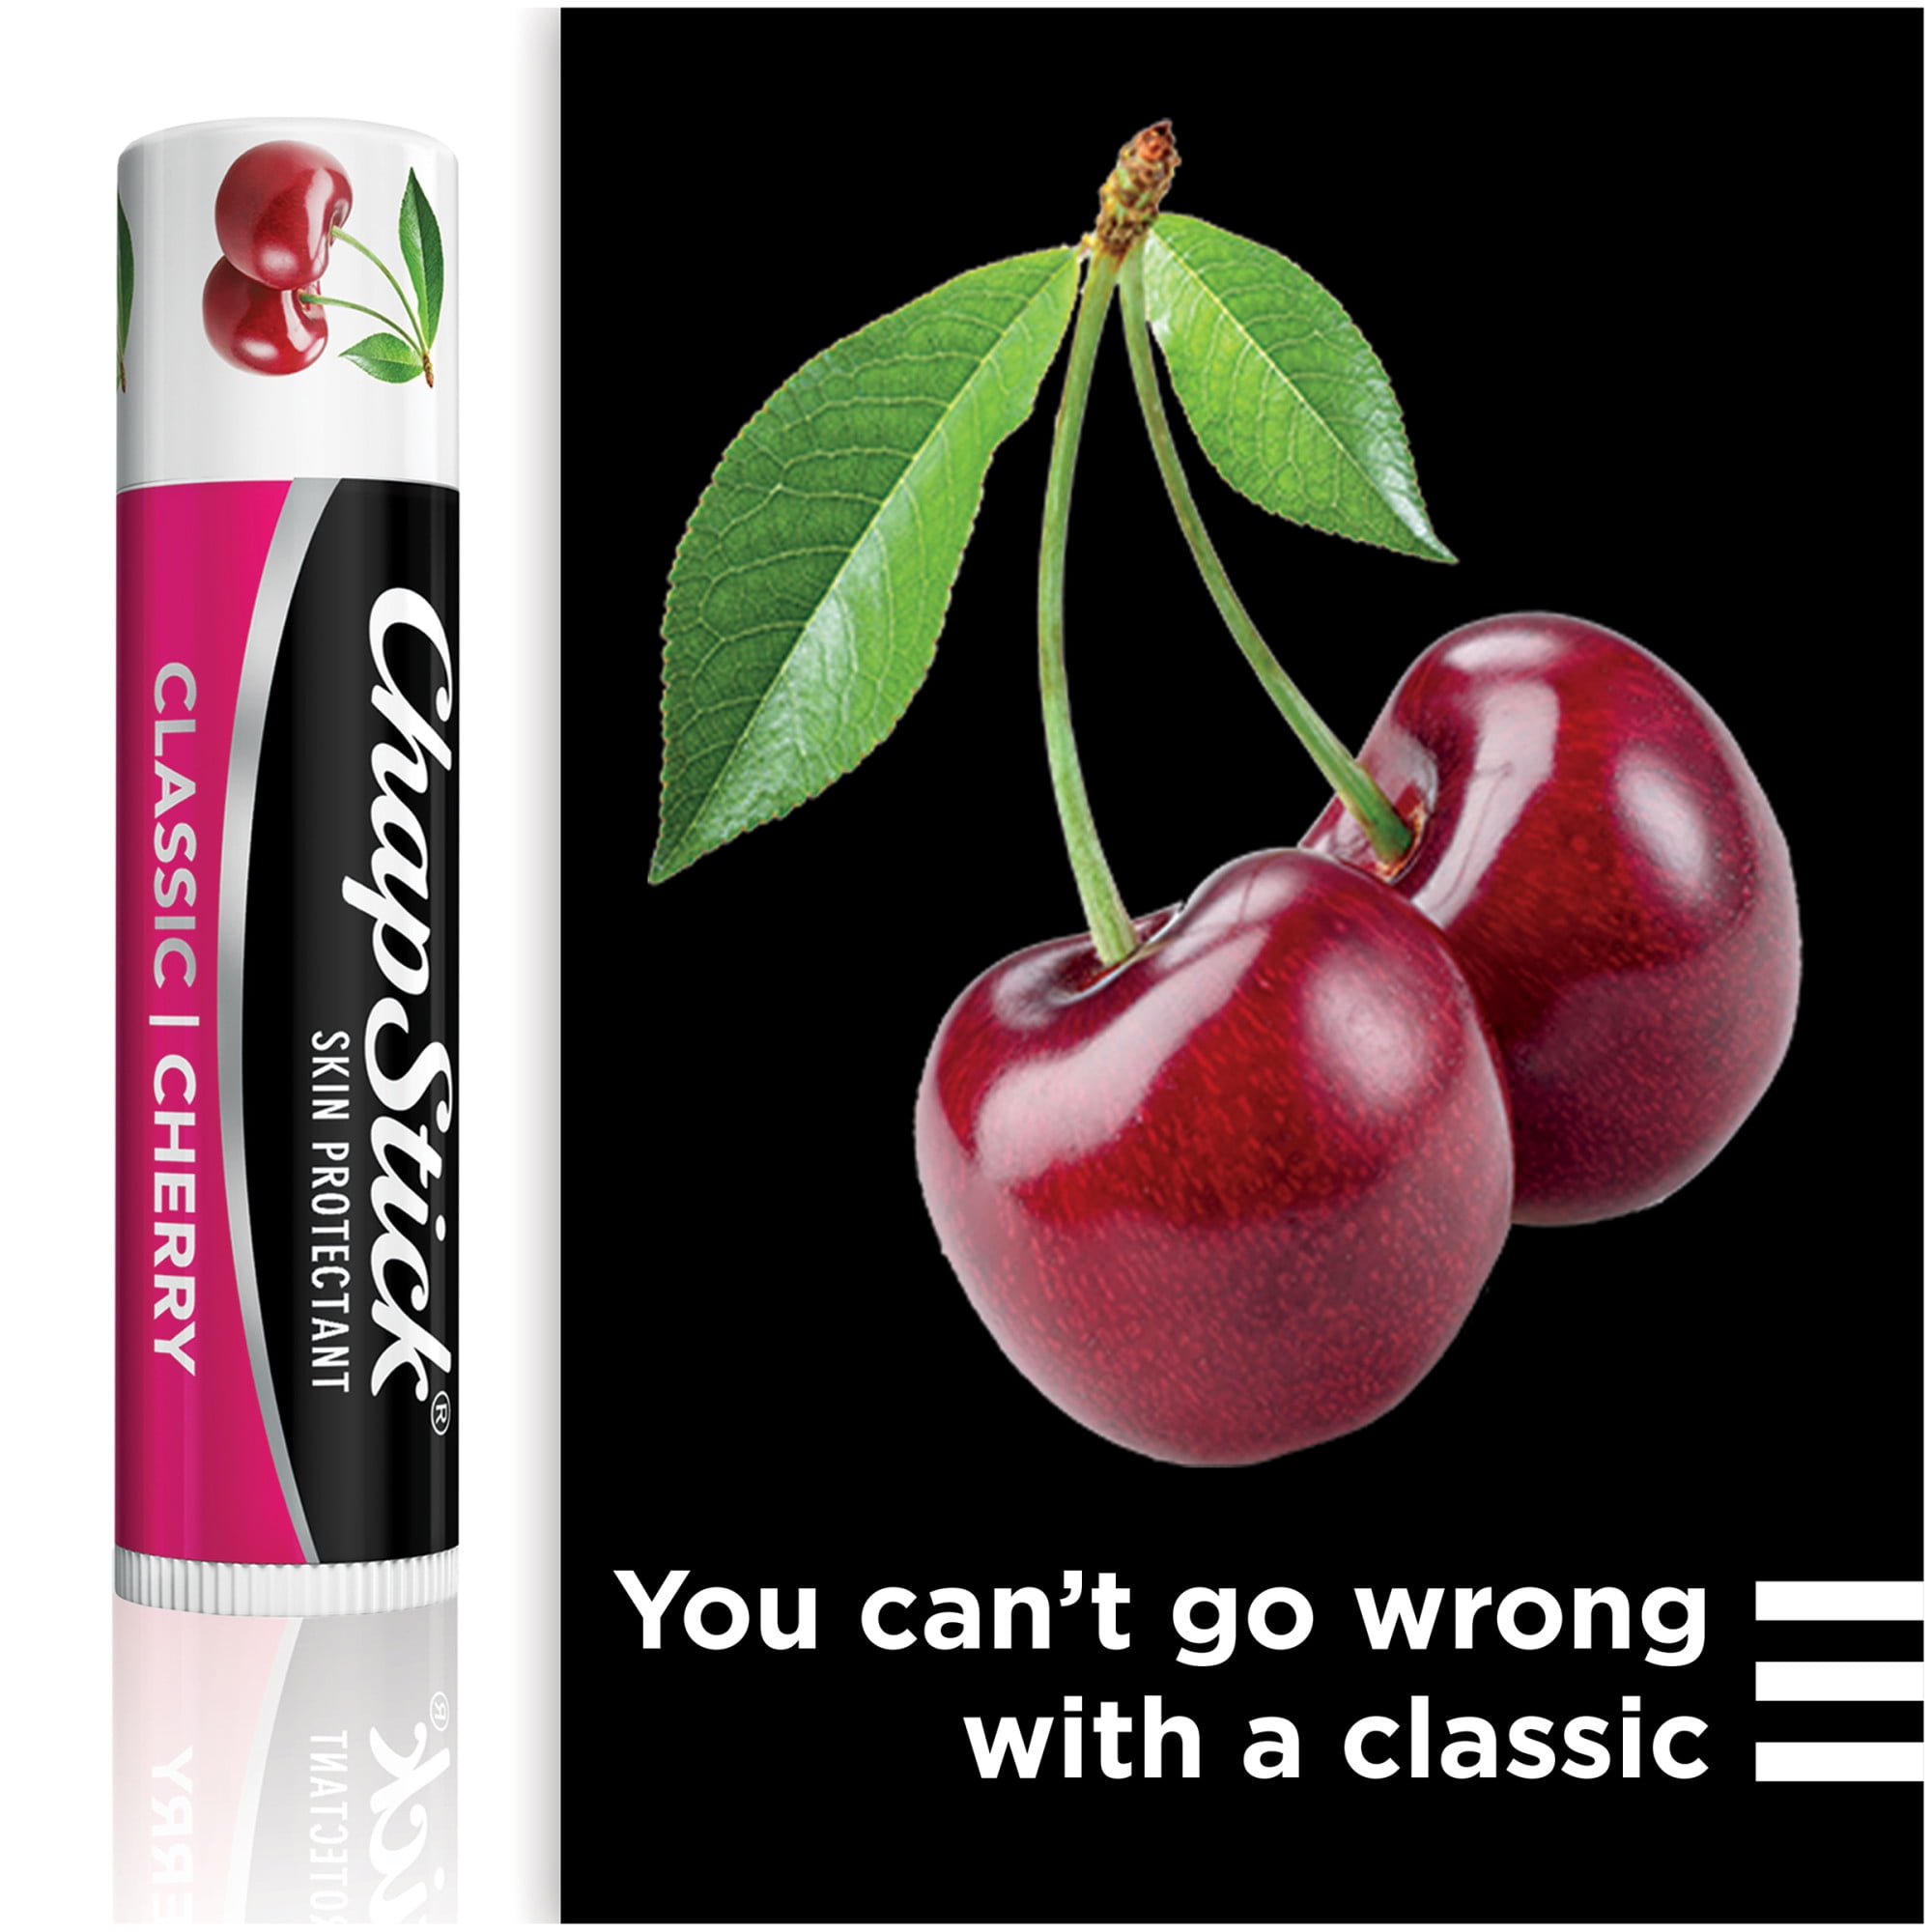 Chapstick Skin Protectant, Classic, Cherry - 3 pack, 0.15 oz each